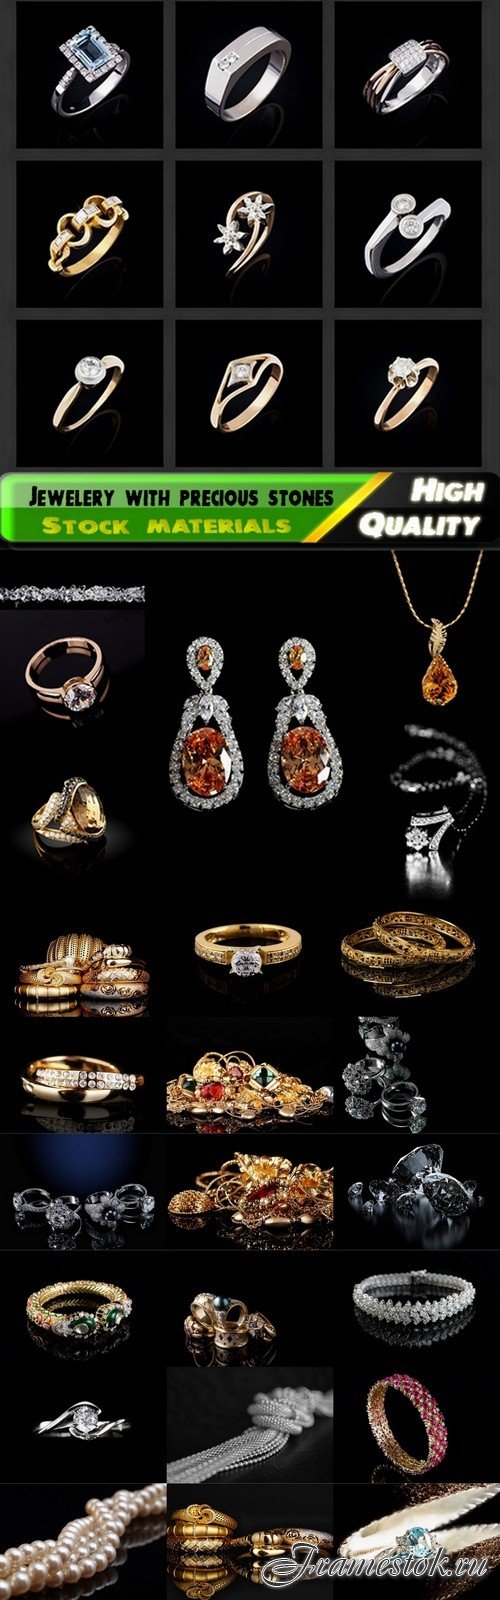 Jewelery with precious stones isolated on black - 25 HQ Jpg